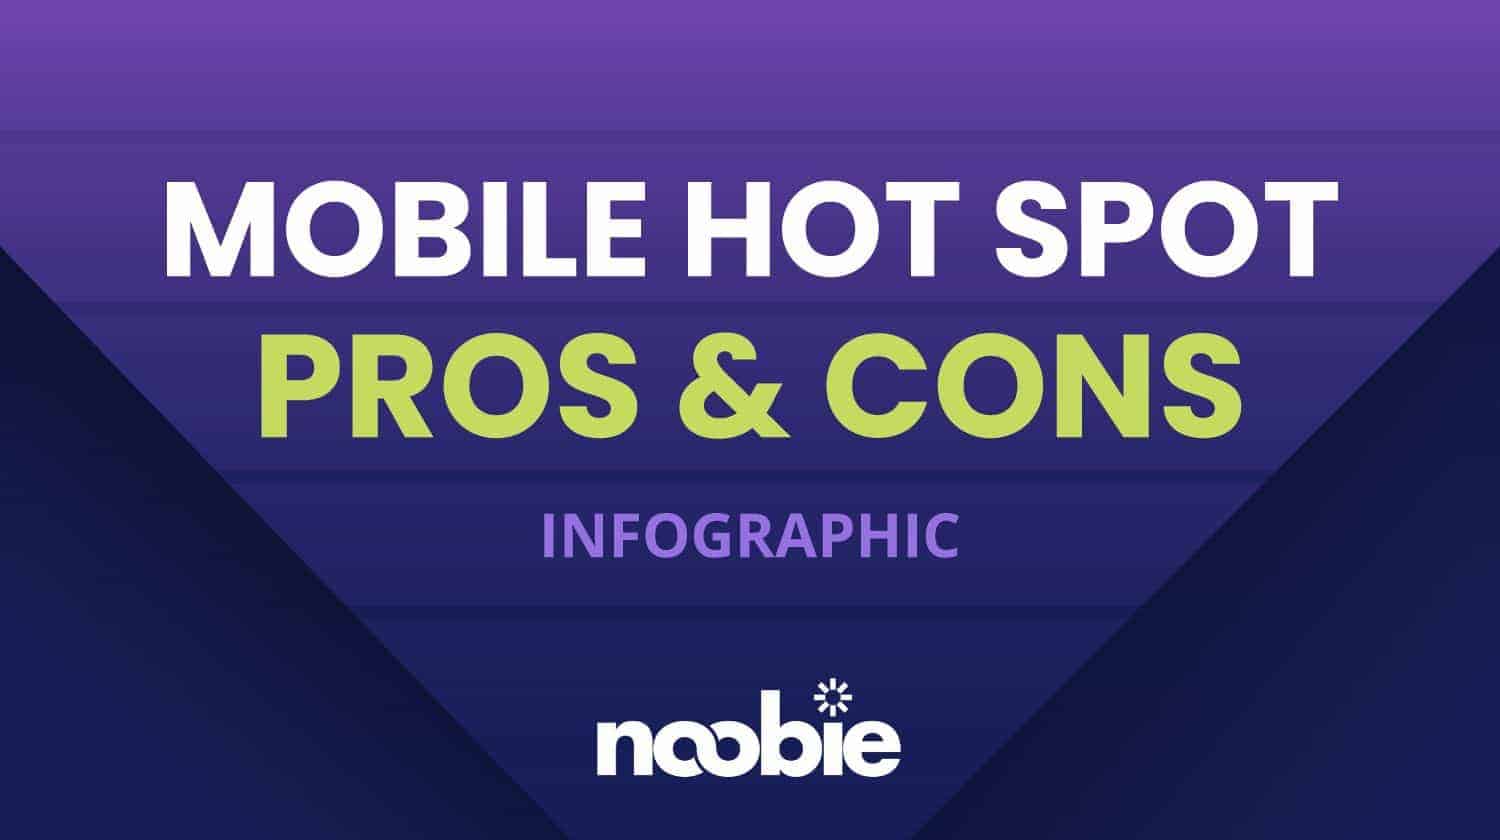 Featured | What Is A Mobile Hotspot? The Pros And Cons Unveiled [INFOGRAPHIC]